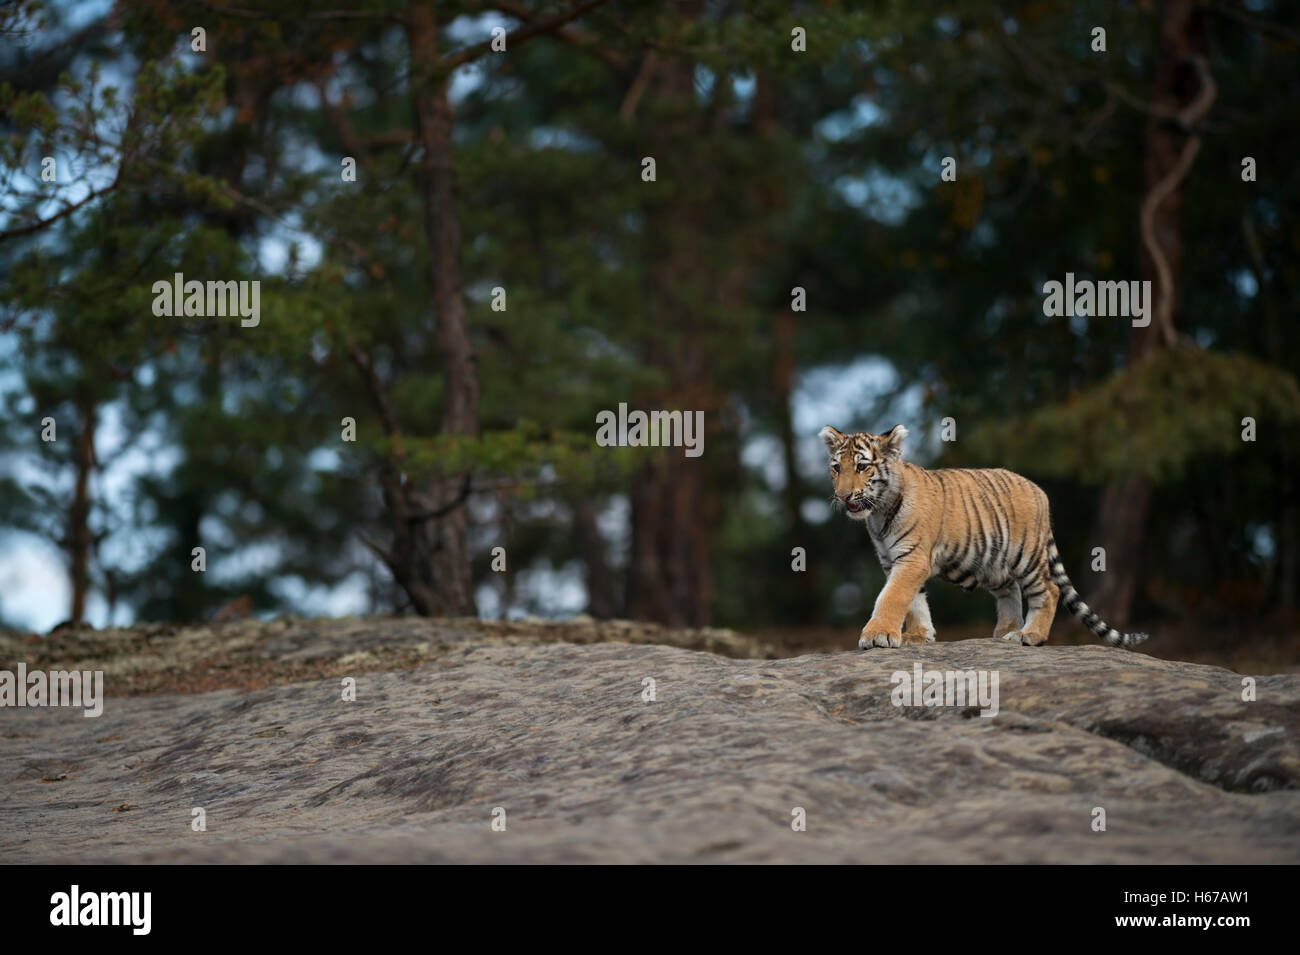 Royal Bengal Tiger ( Panthera tigris ), young animal in habitat, at the edge of a forest, walking over a slab of rock. Stock Photo